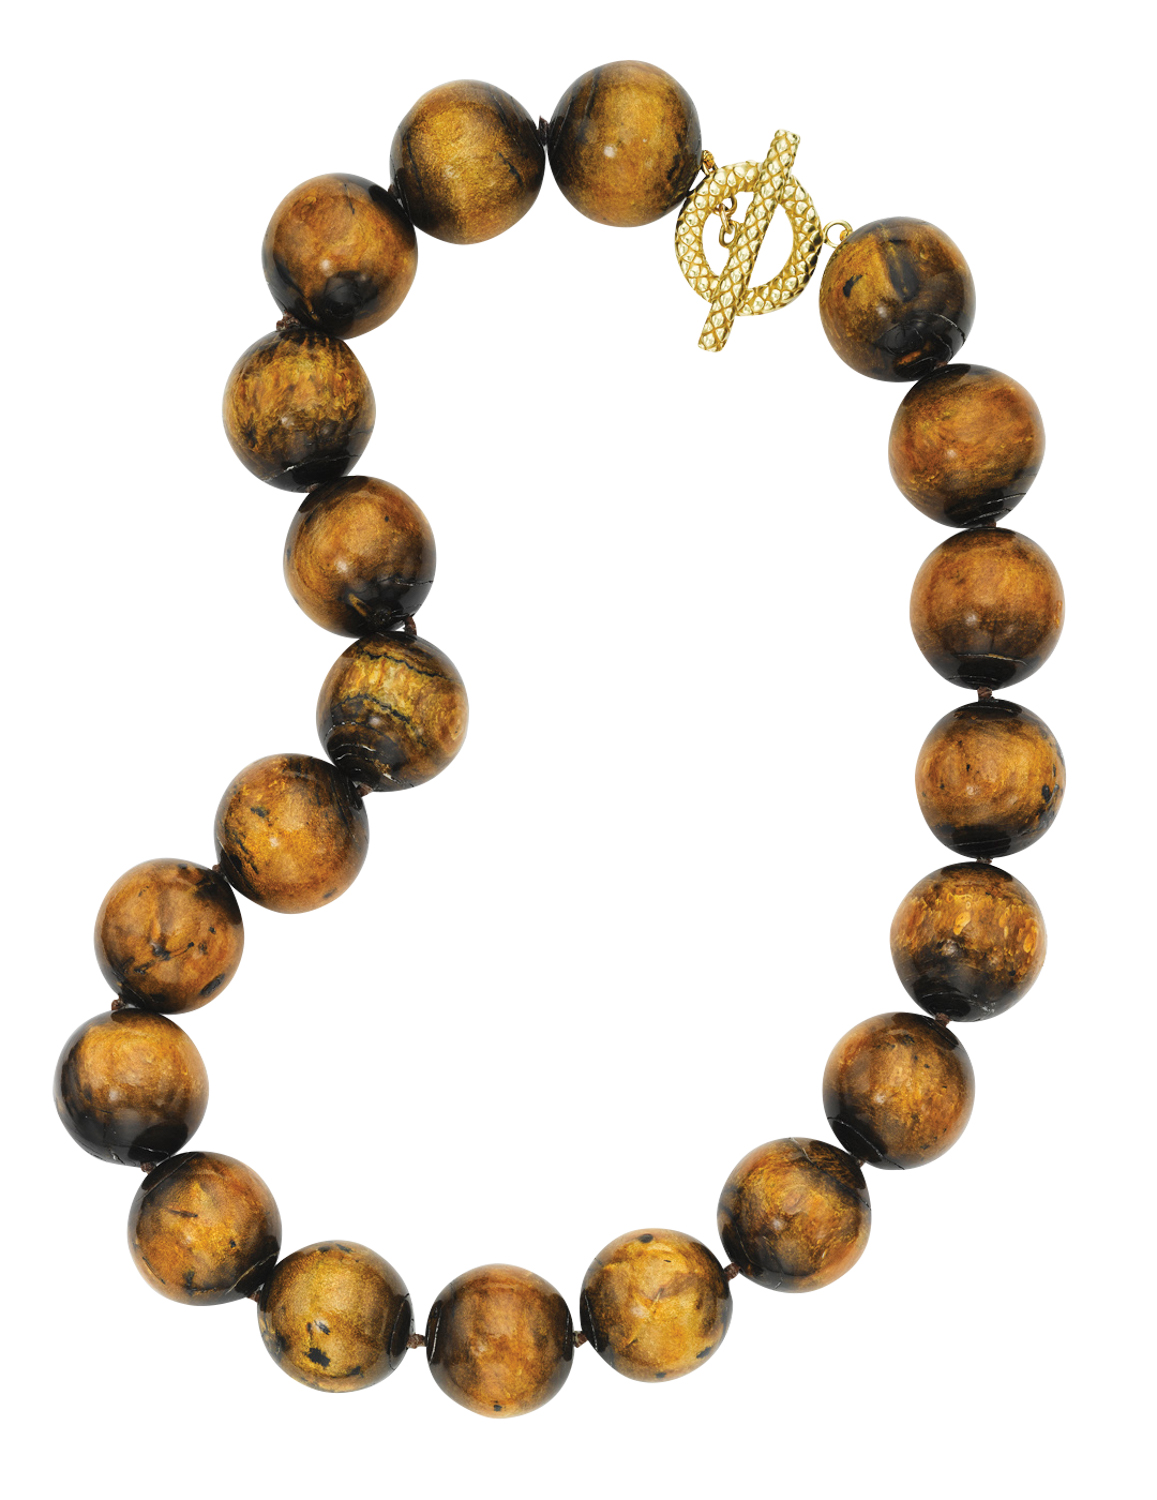 tiger's eye beads in a necklace